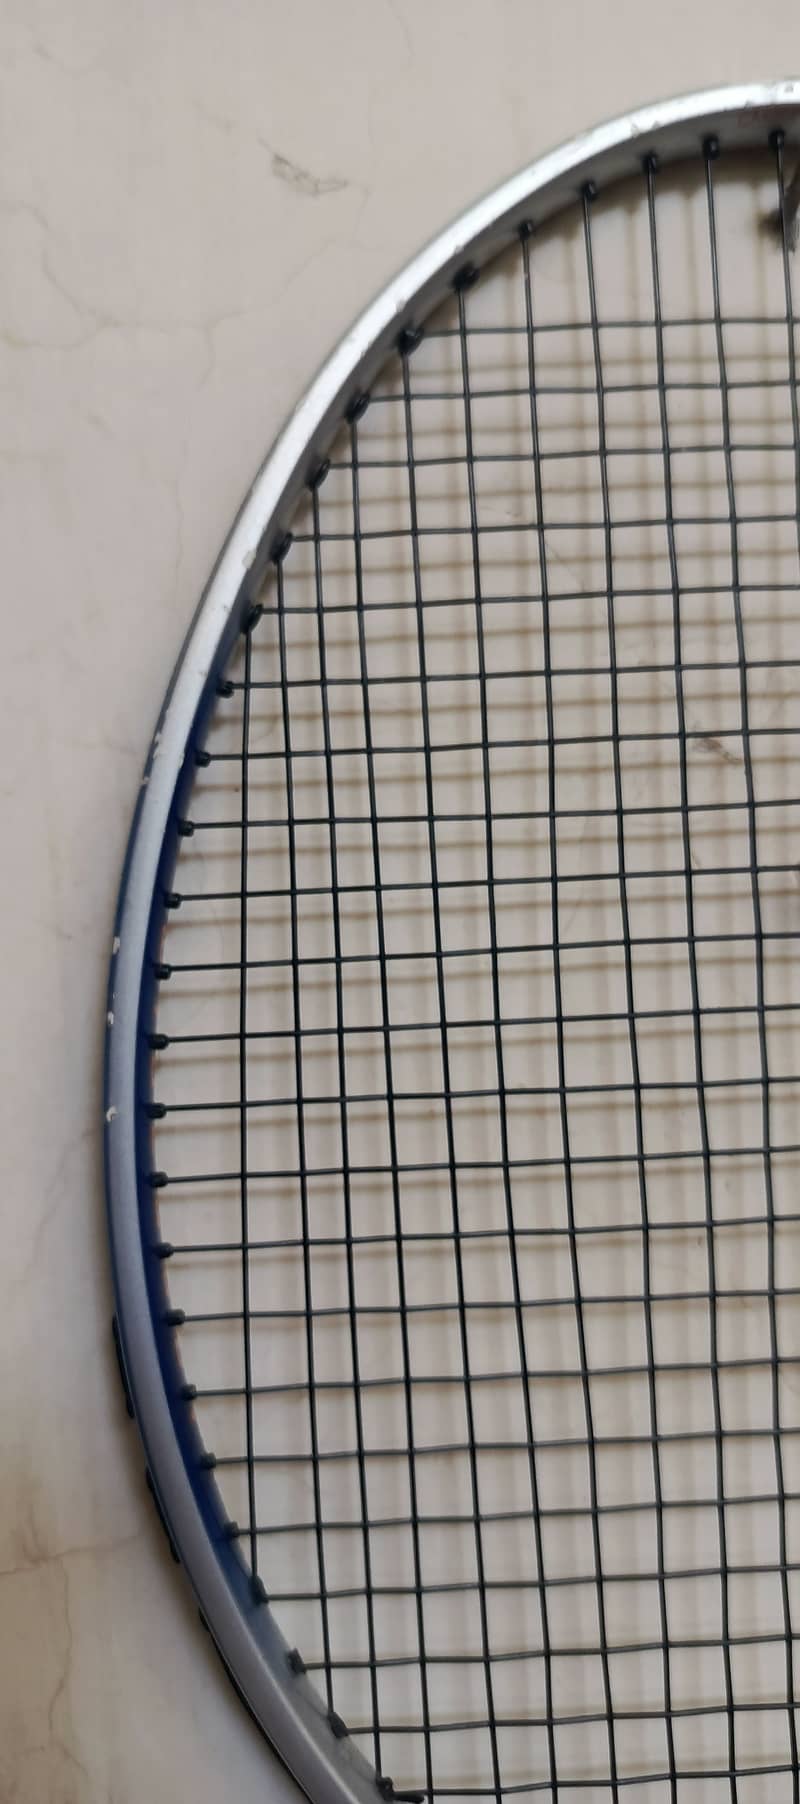 Badminton Racket | Hiqua 150 made in USA weight 84 tension 28 lbs 2